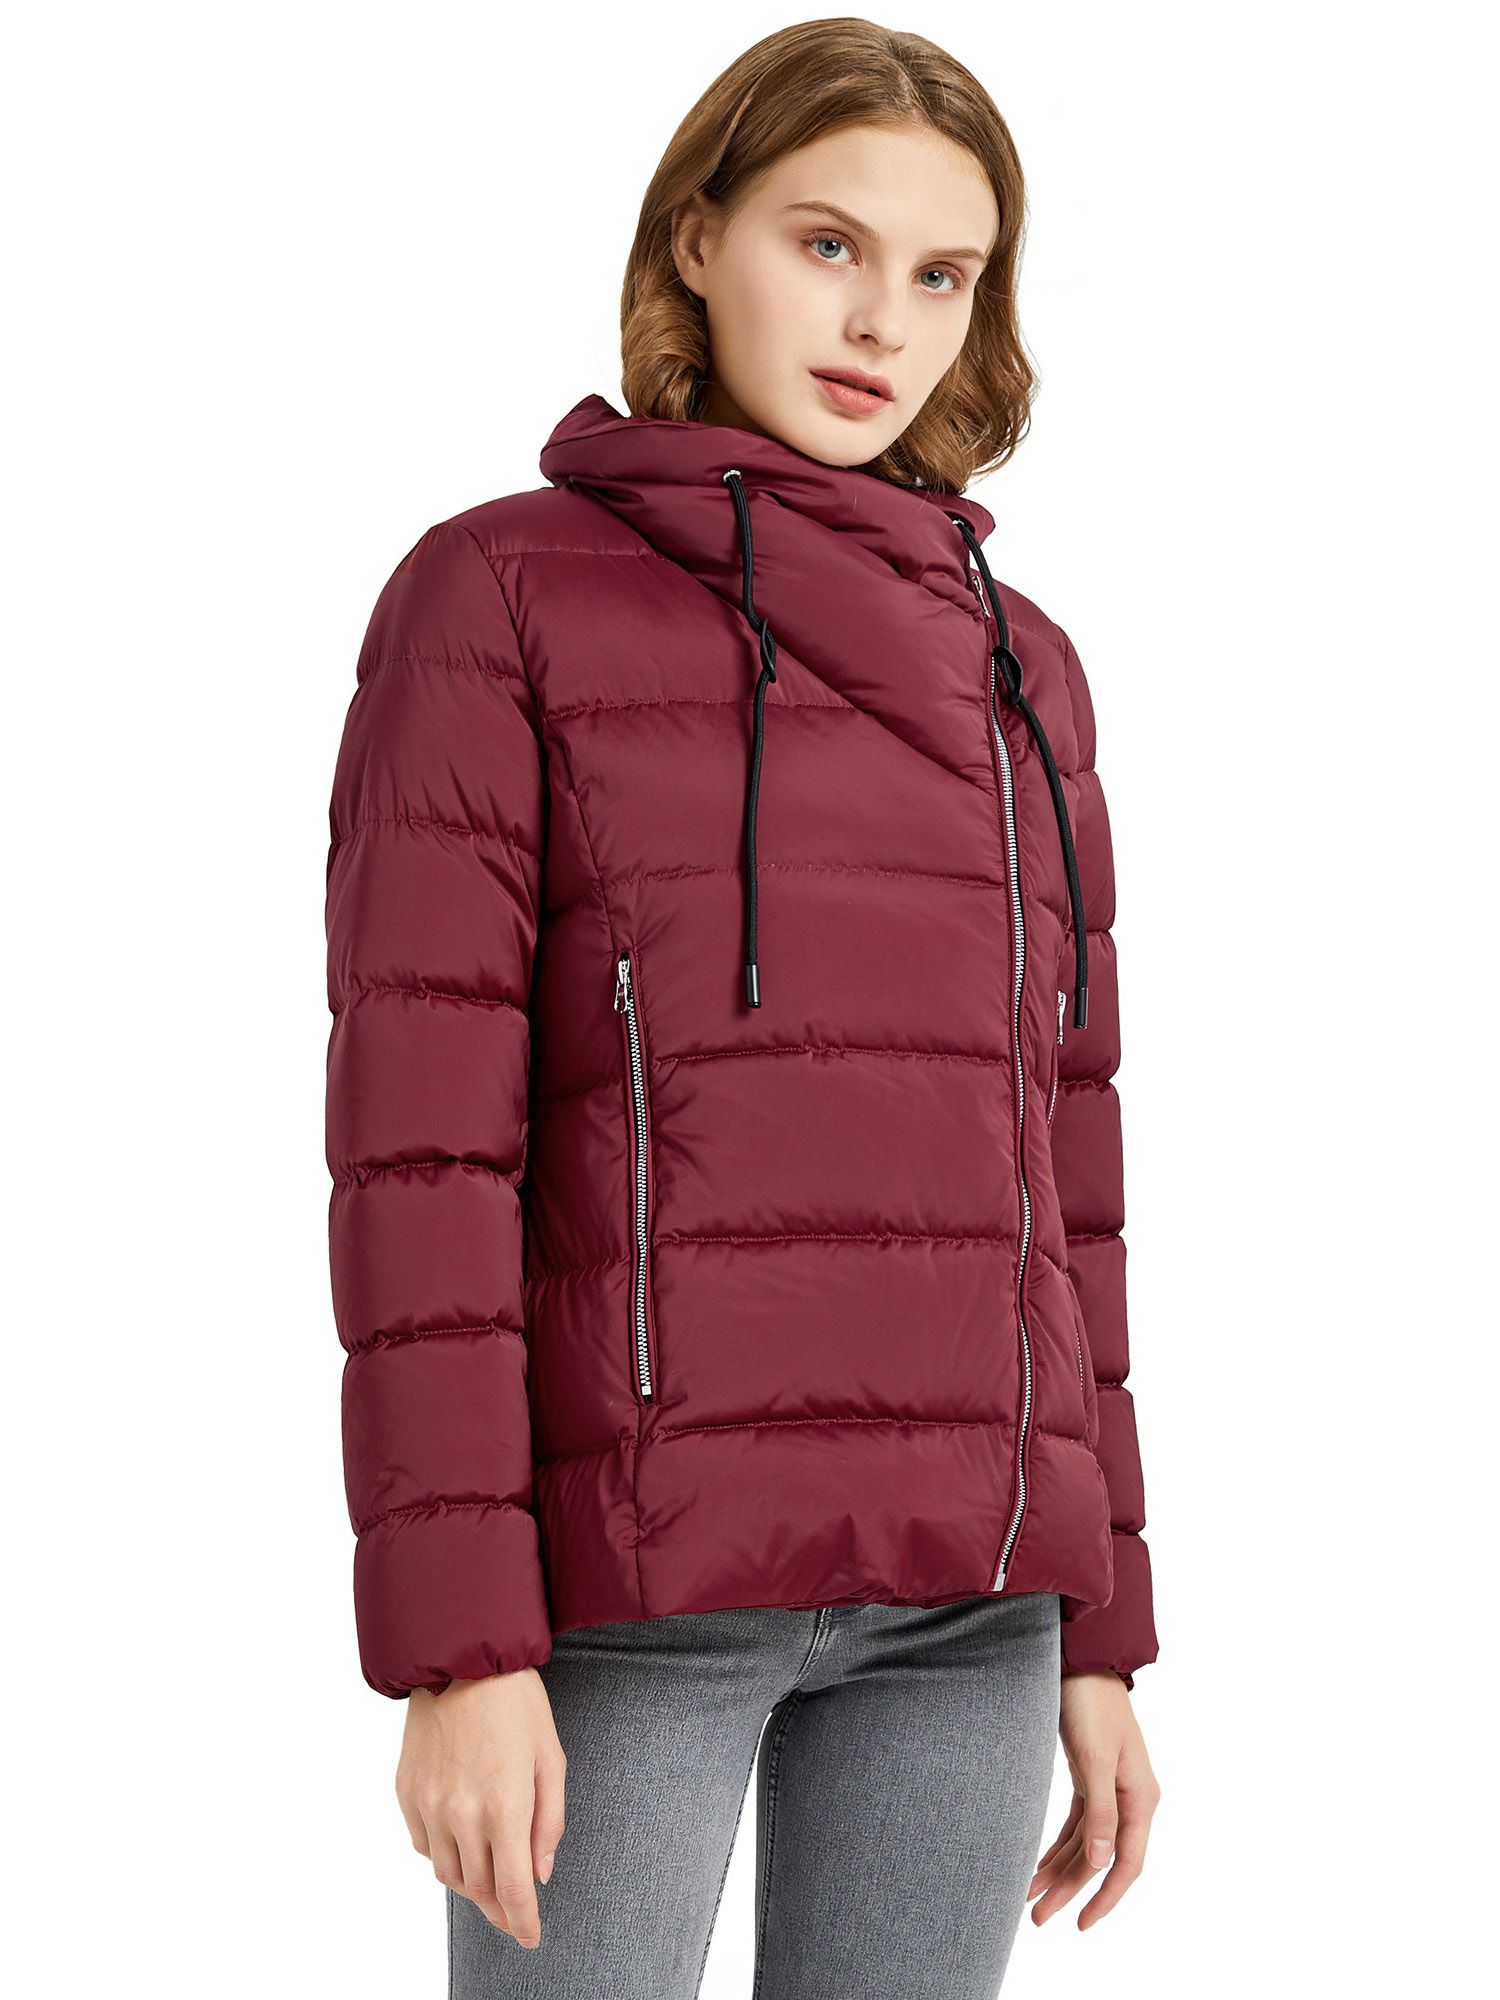 Orolay Hooded Down Jacket Women Winter Stand Collar Oblique Placket Puffer Coat - image 2 of 5